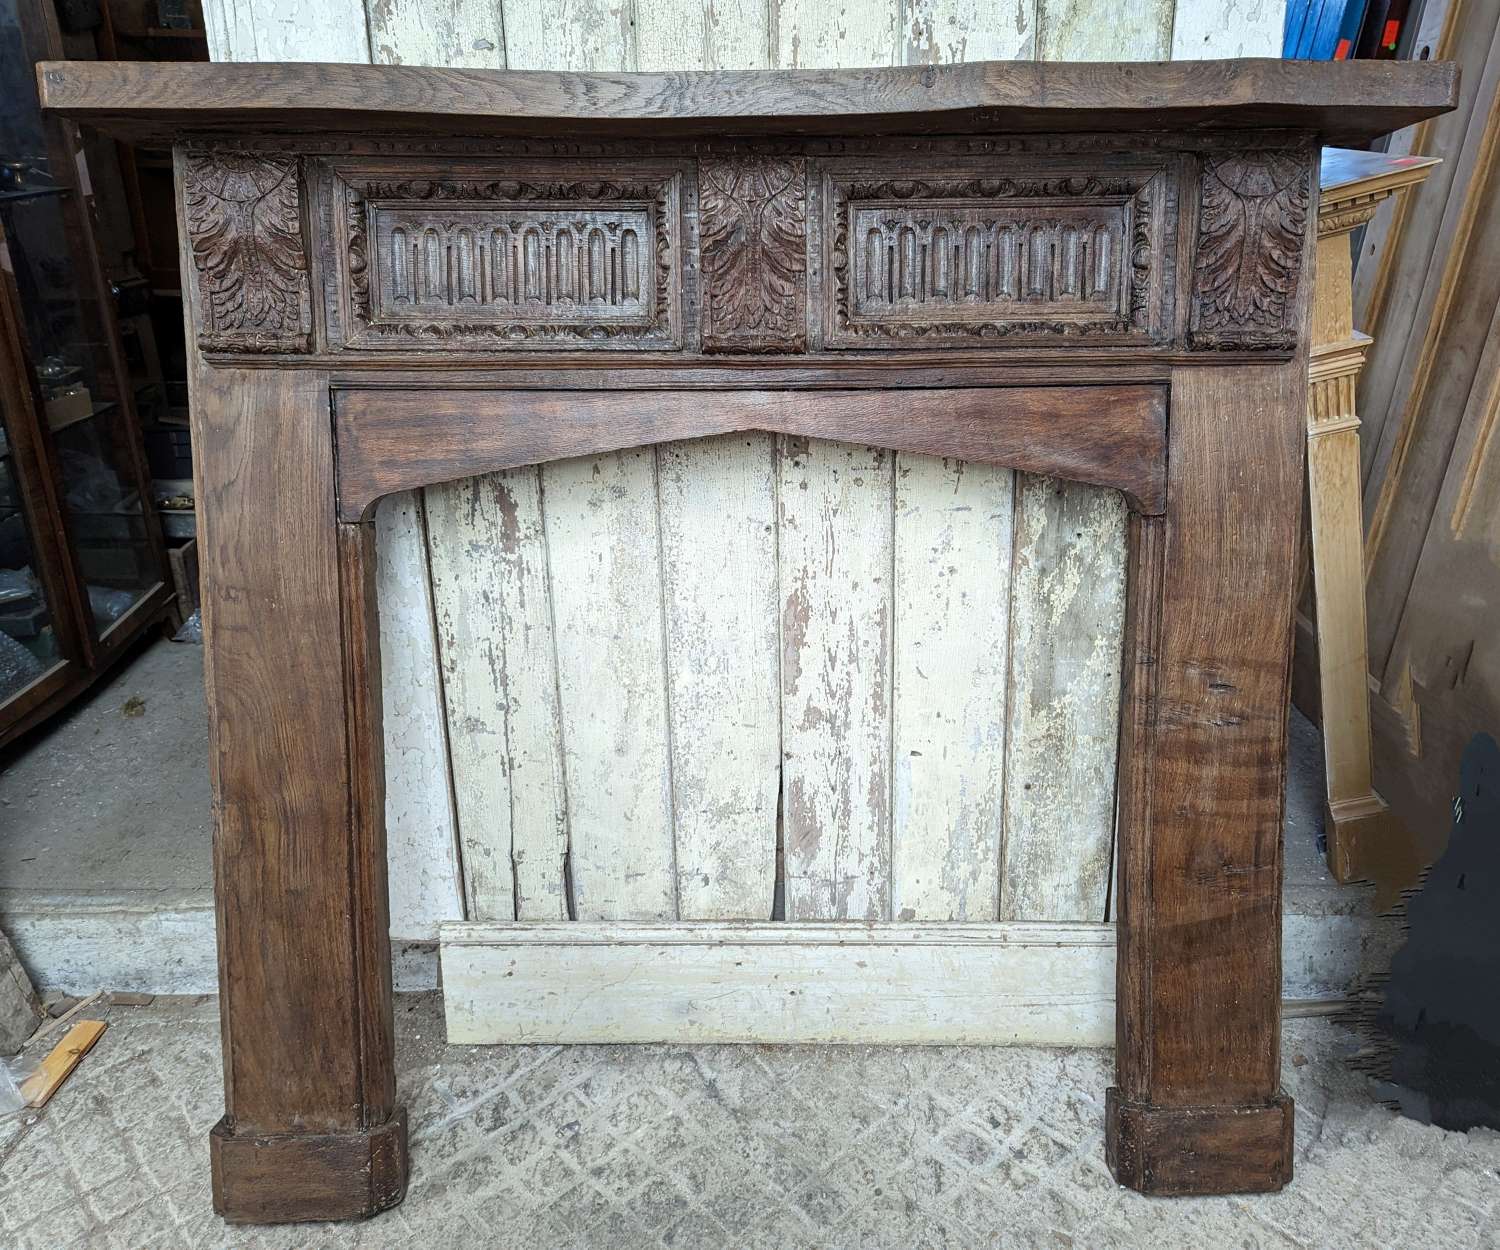 FS0280 A VERY LARGE CARVED OAK ANTIQUE FIRE SURROUND HISTORICAL STYLE